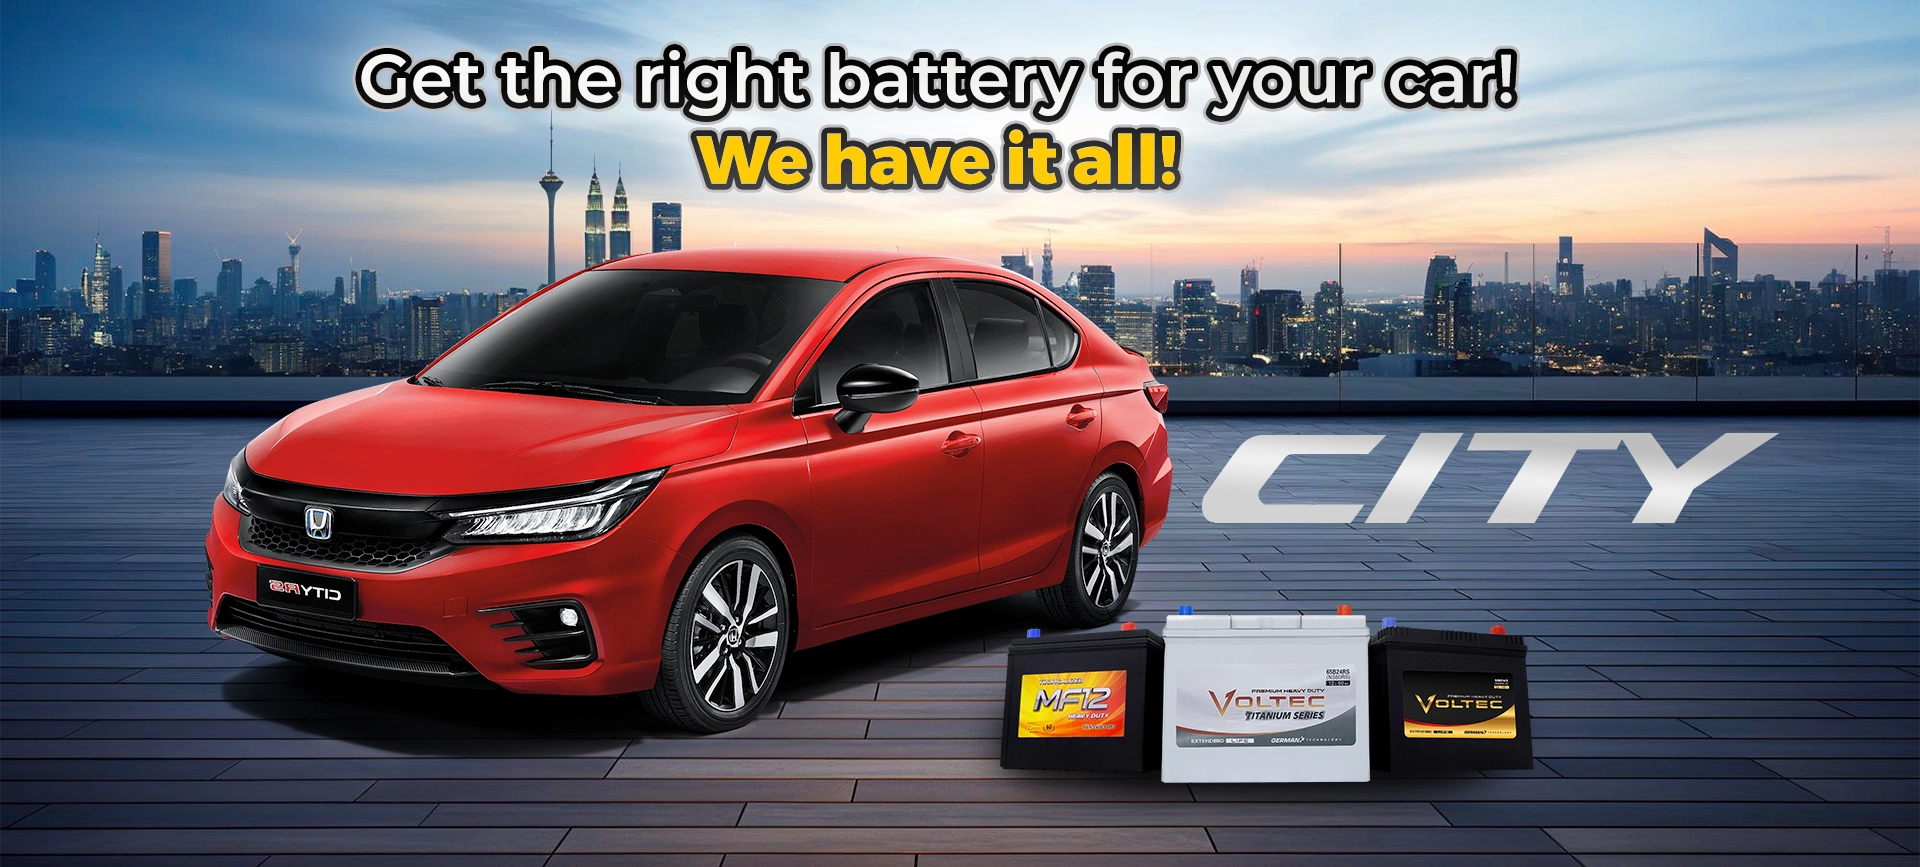 Best Honda city car battery replacement price